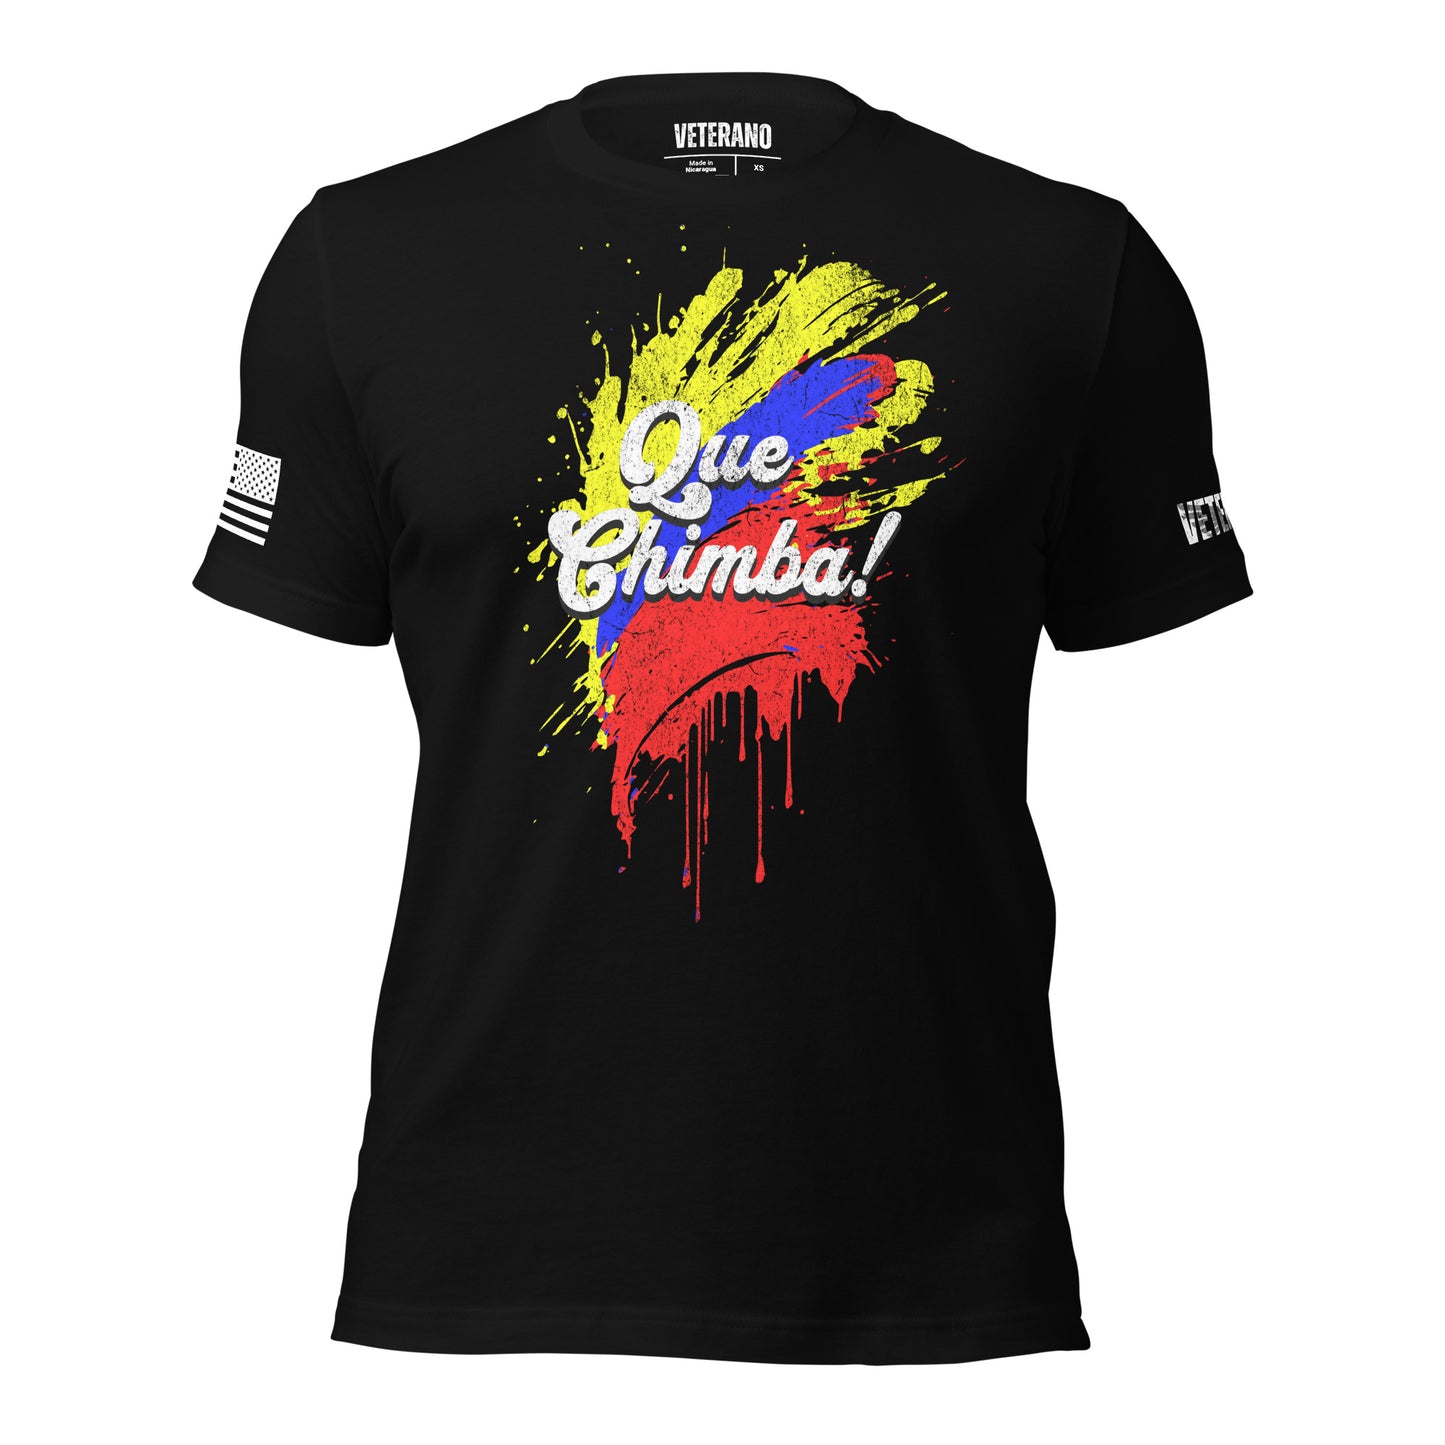 Que Chimba Colombia Tshirt